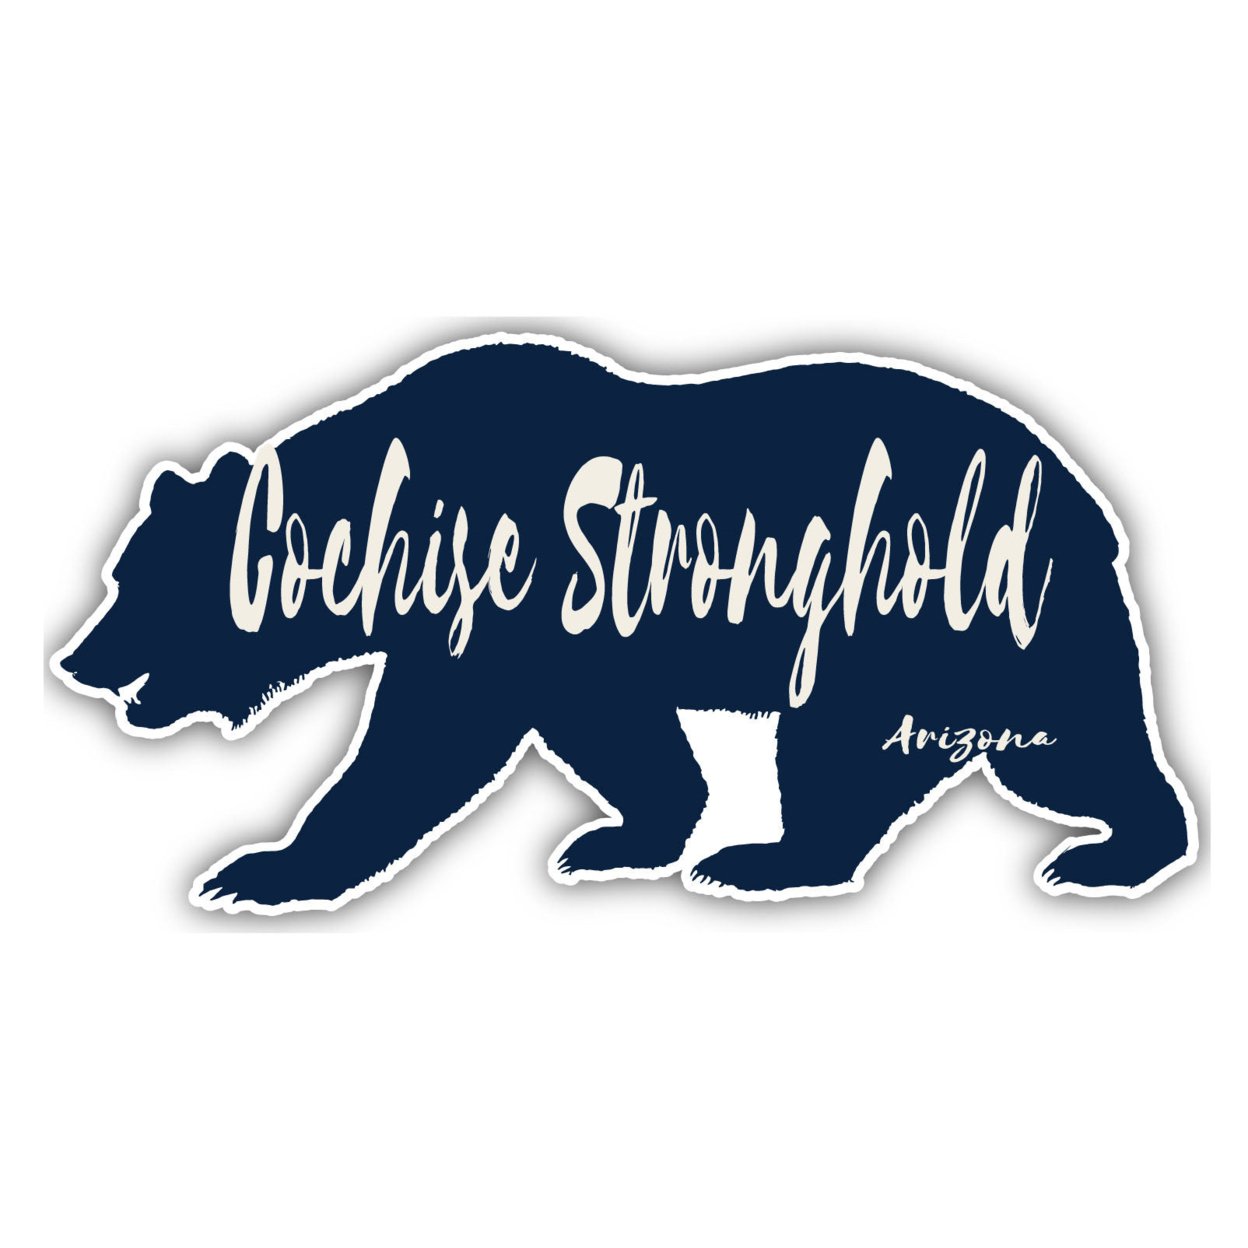 Cochise Stronghold Arizona Souvenir Decorative Stickers (Choose Theme And Size) - 4-Pack, 6-Inch, Bear